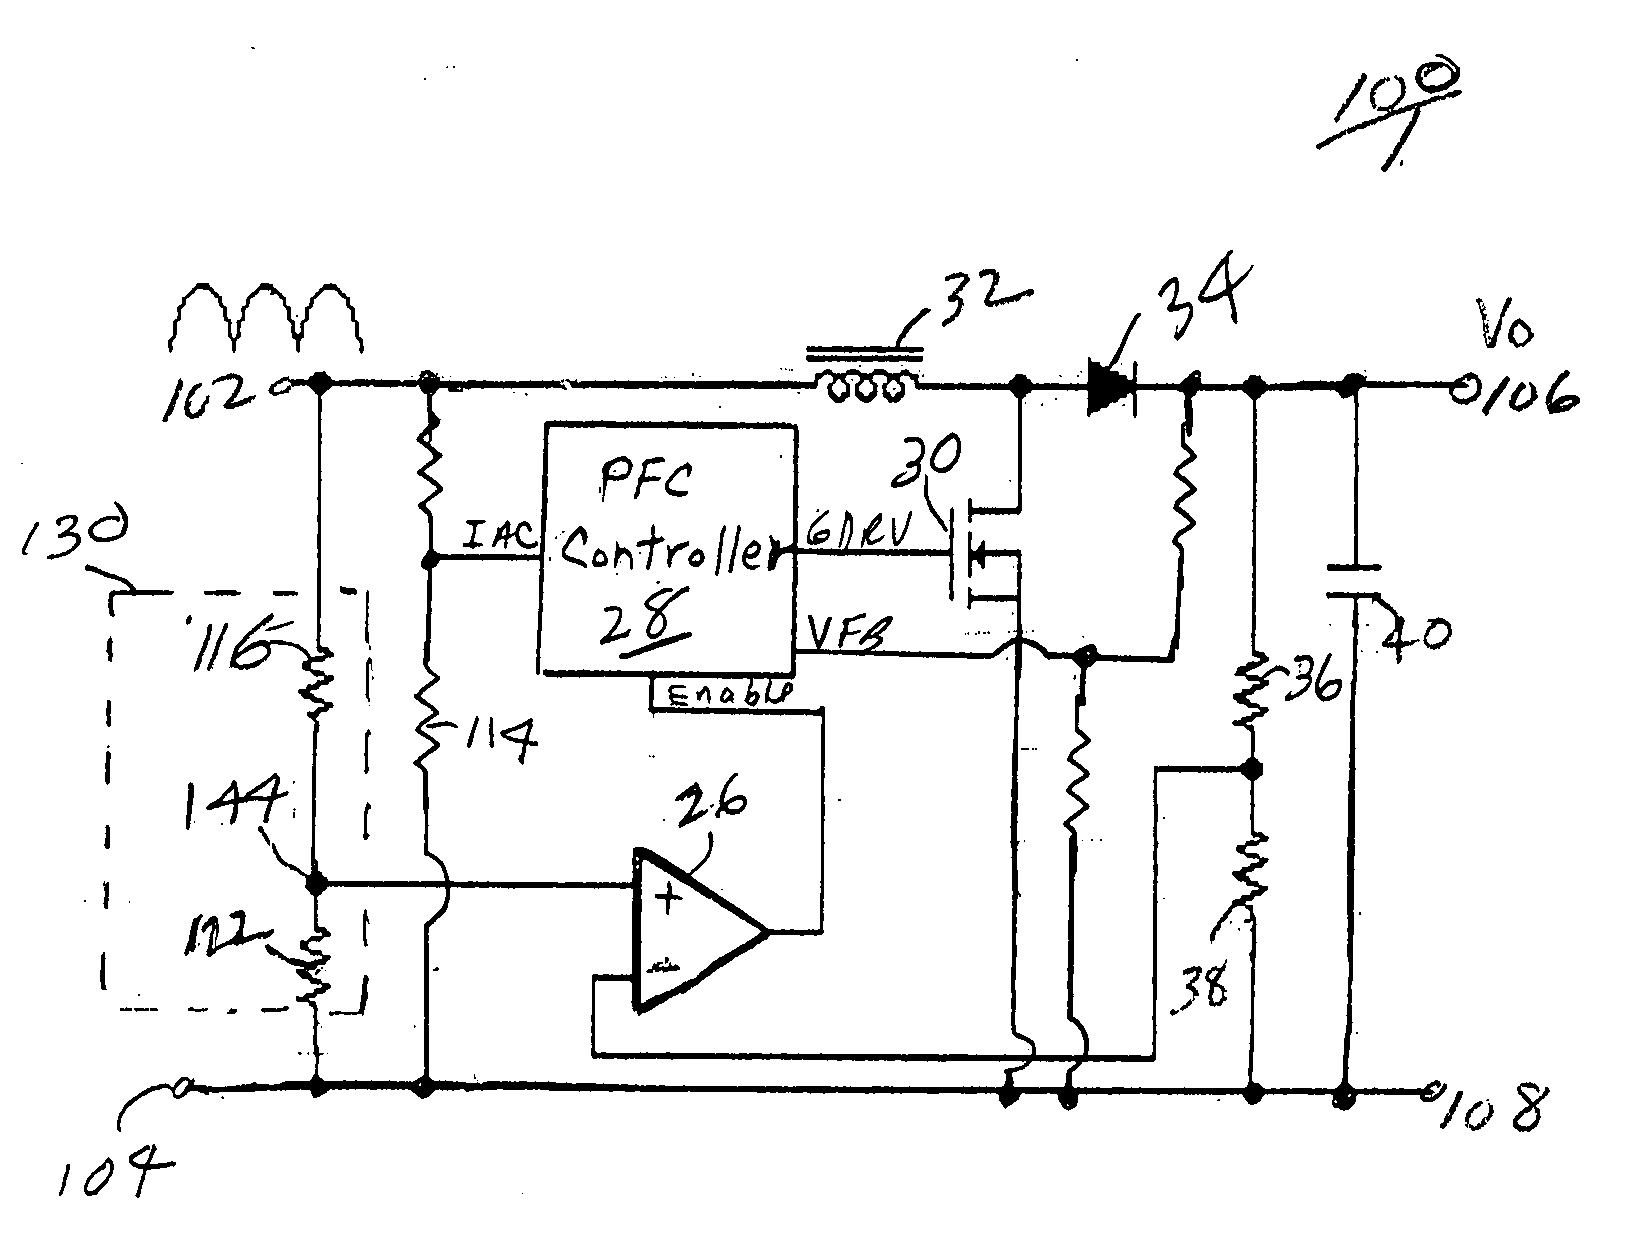 Real-time voltage detection and protection circuit for PFC boost converters